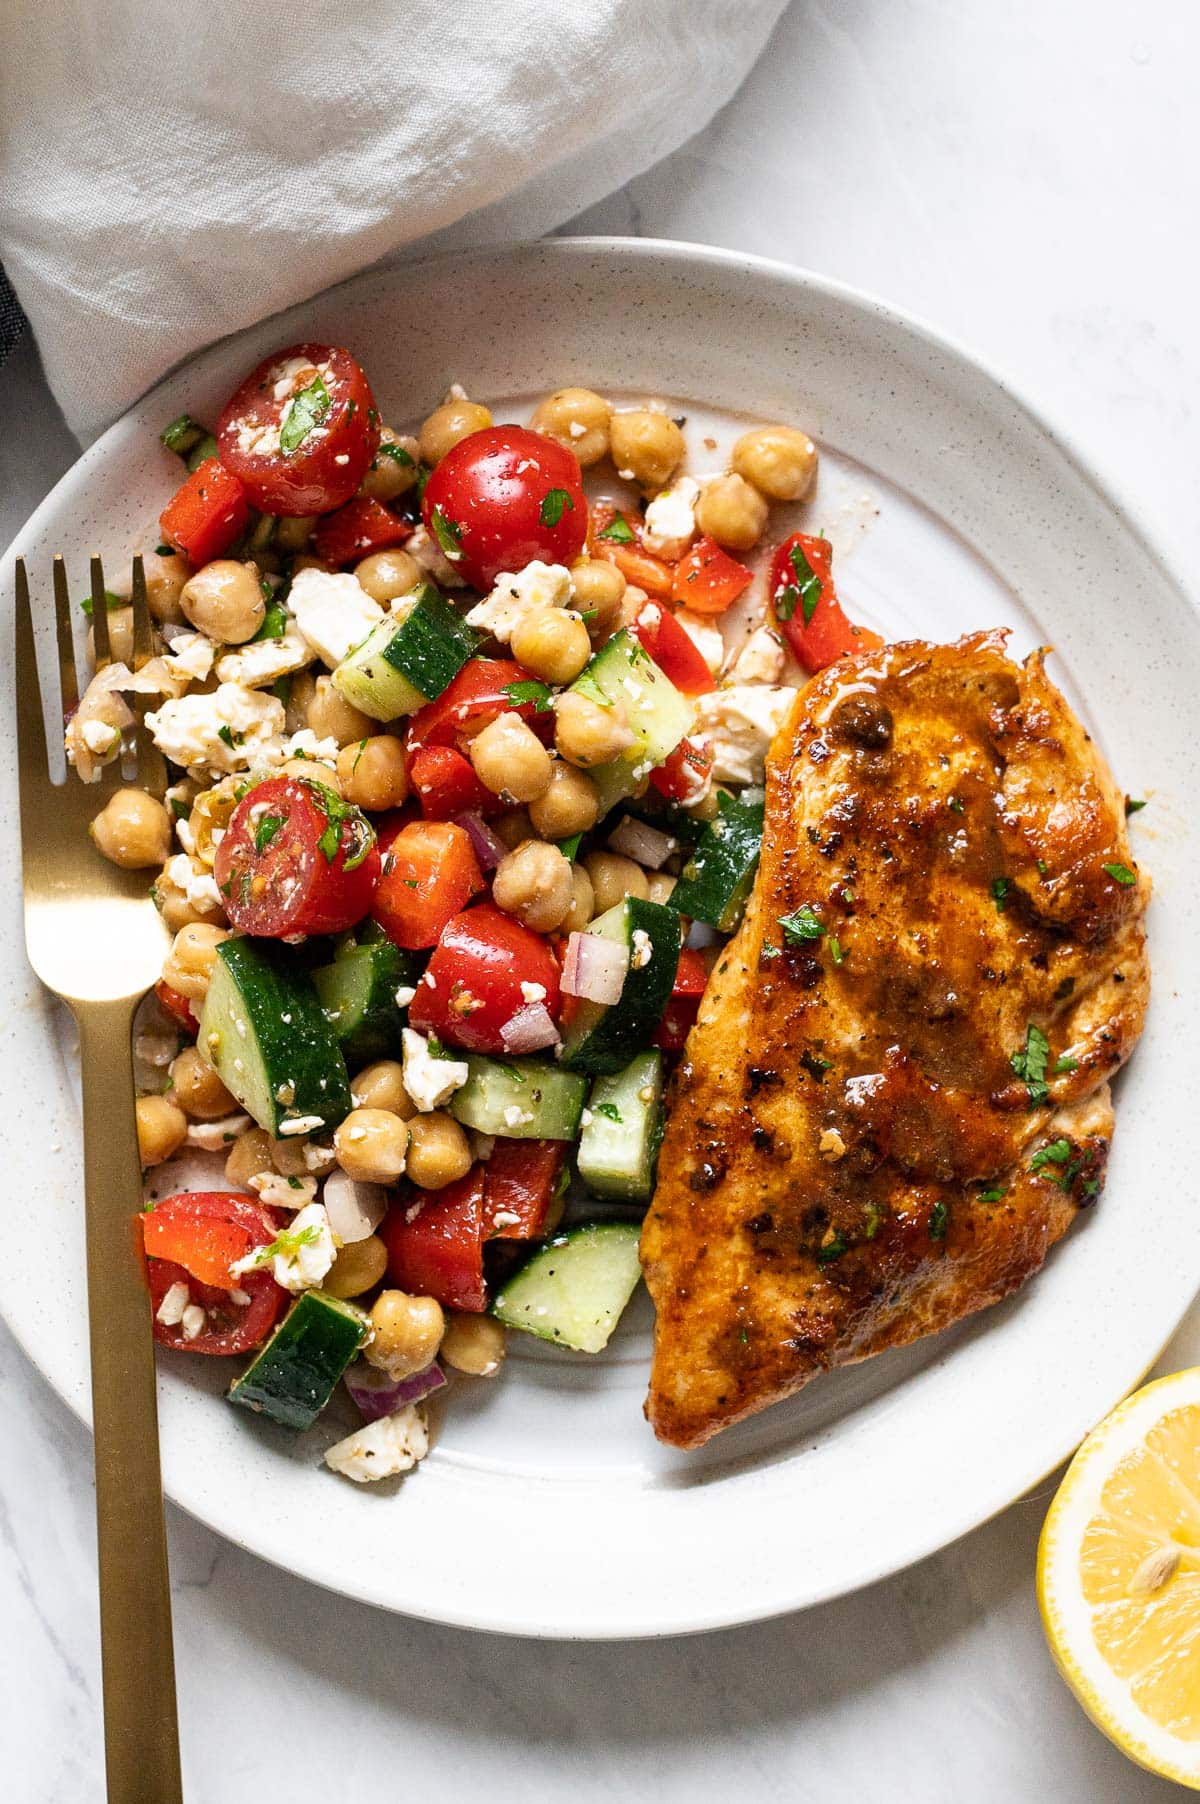 Mediterranean chickpea salad served with pan fried chicken breast on a plate with a fork.